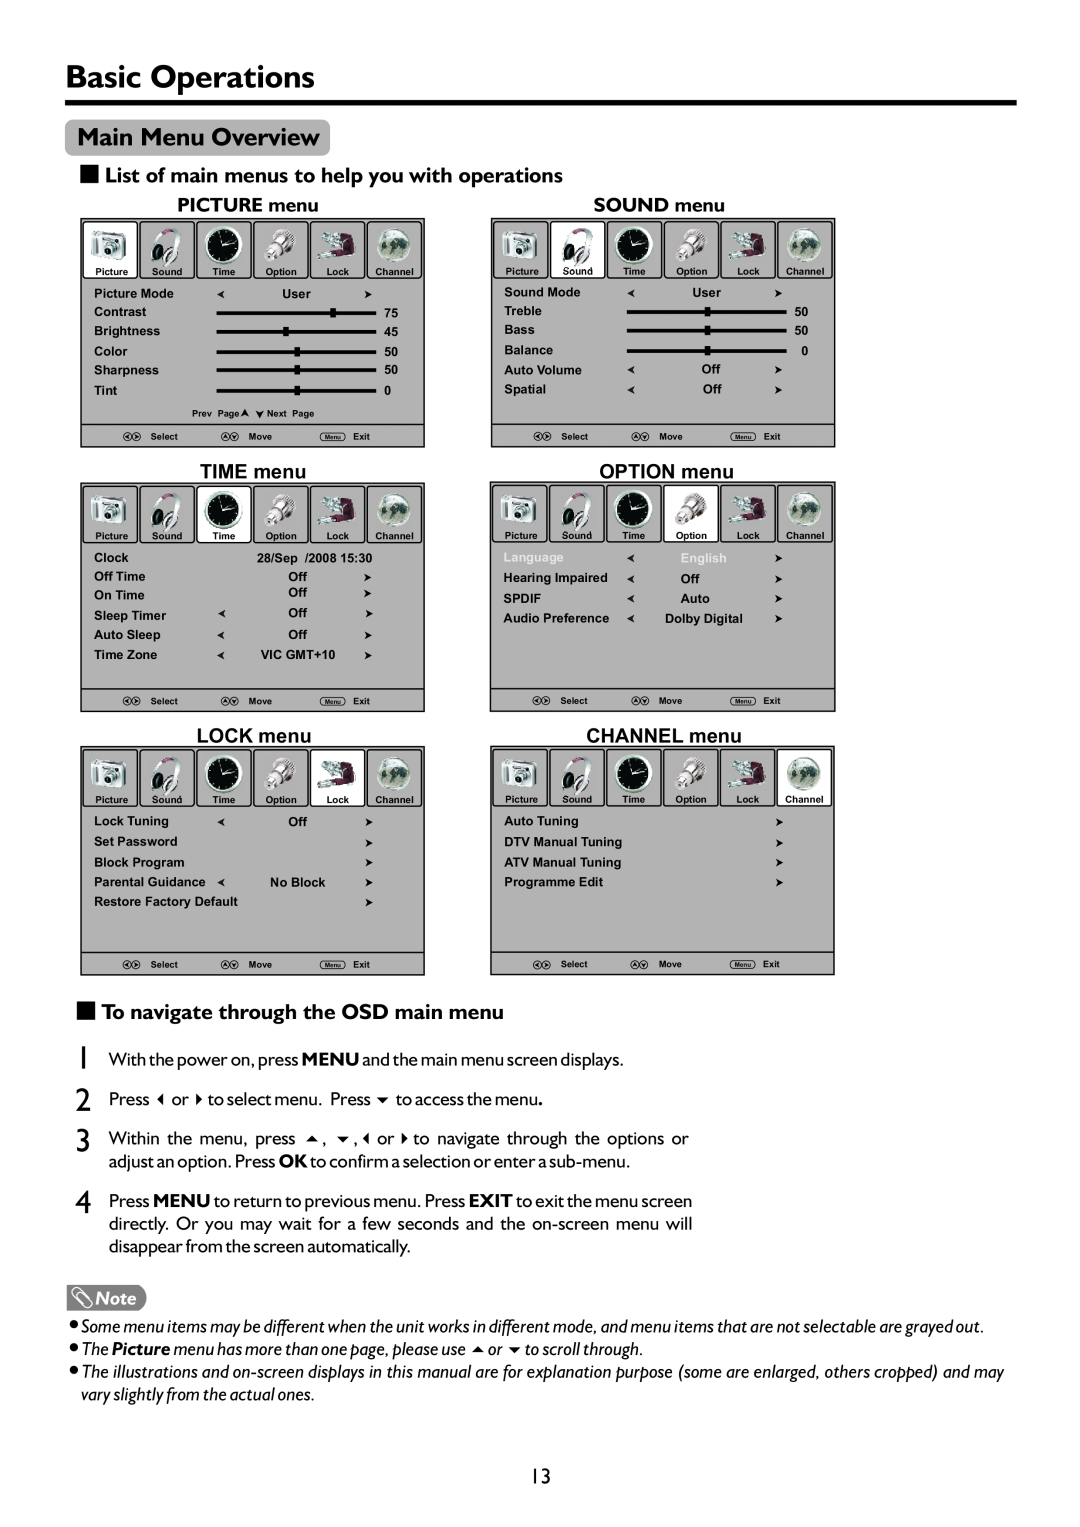 Palsonic TFTV4200FHD Basic Operations, Main Menu Overview, List of main menus to help you with operations, PICTURE menu 